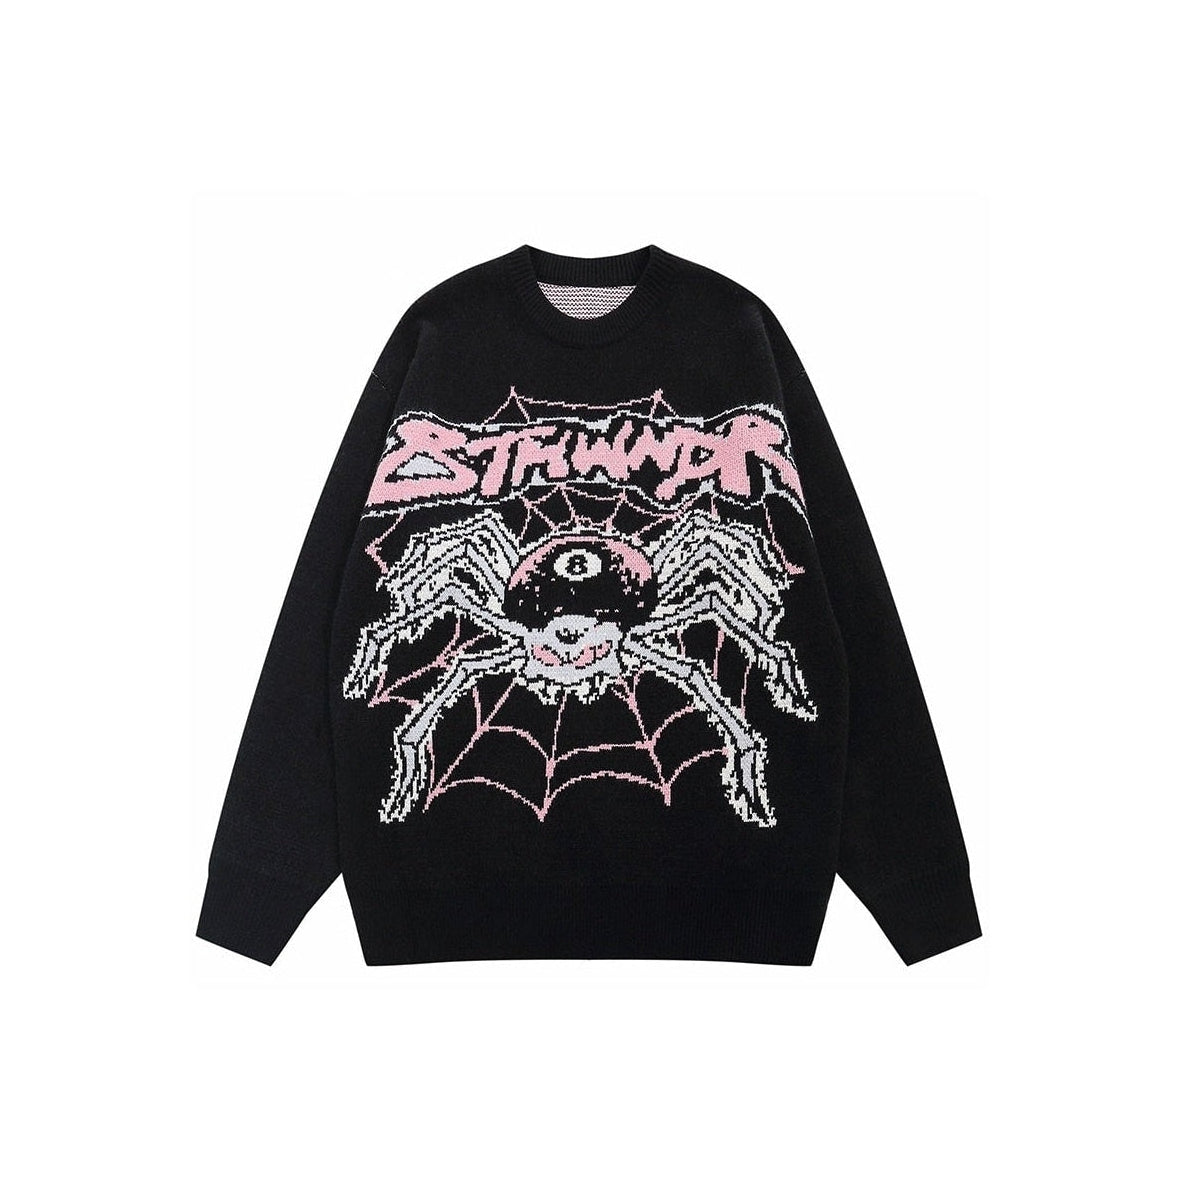 Evil Spider Graphic Knit Cotton Sweater-Sweaters-MAUV STUDIO-STREETWEAR-Y2K-CLOTHING